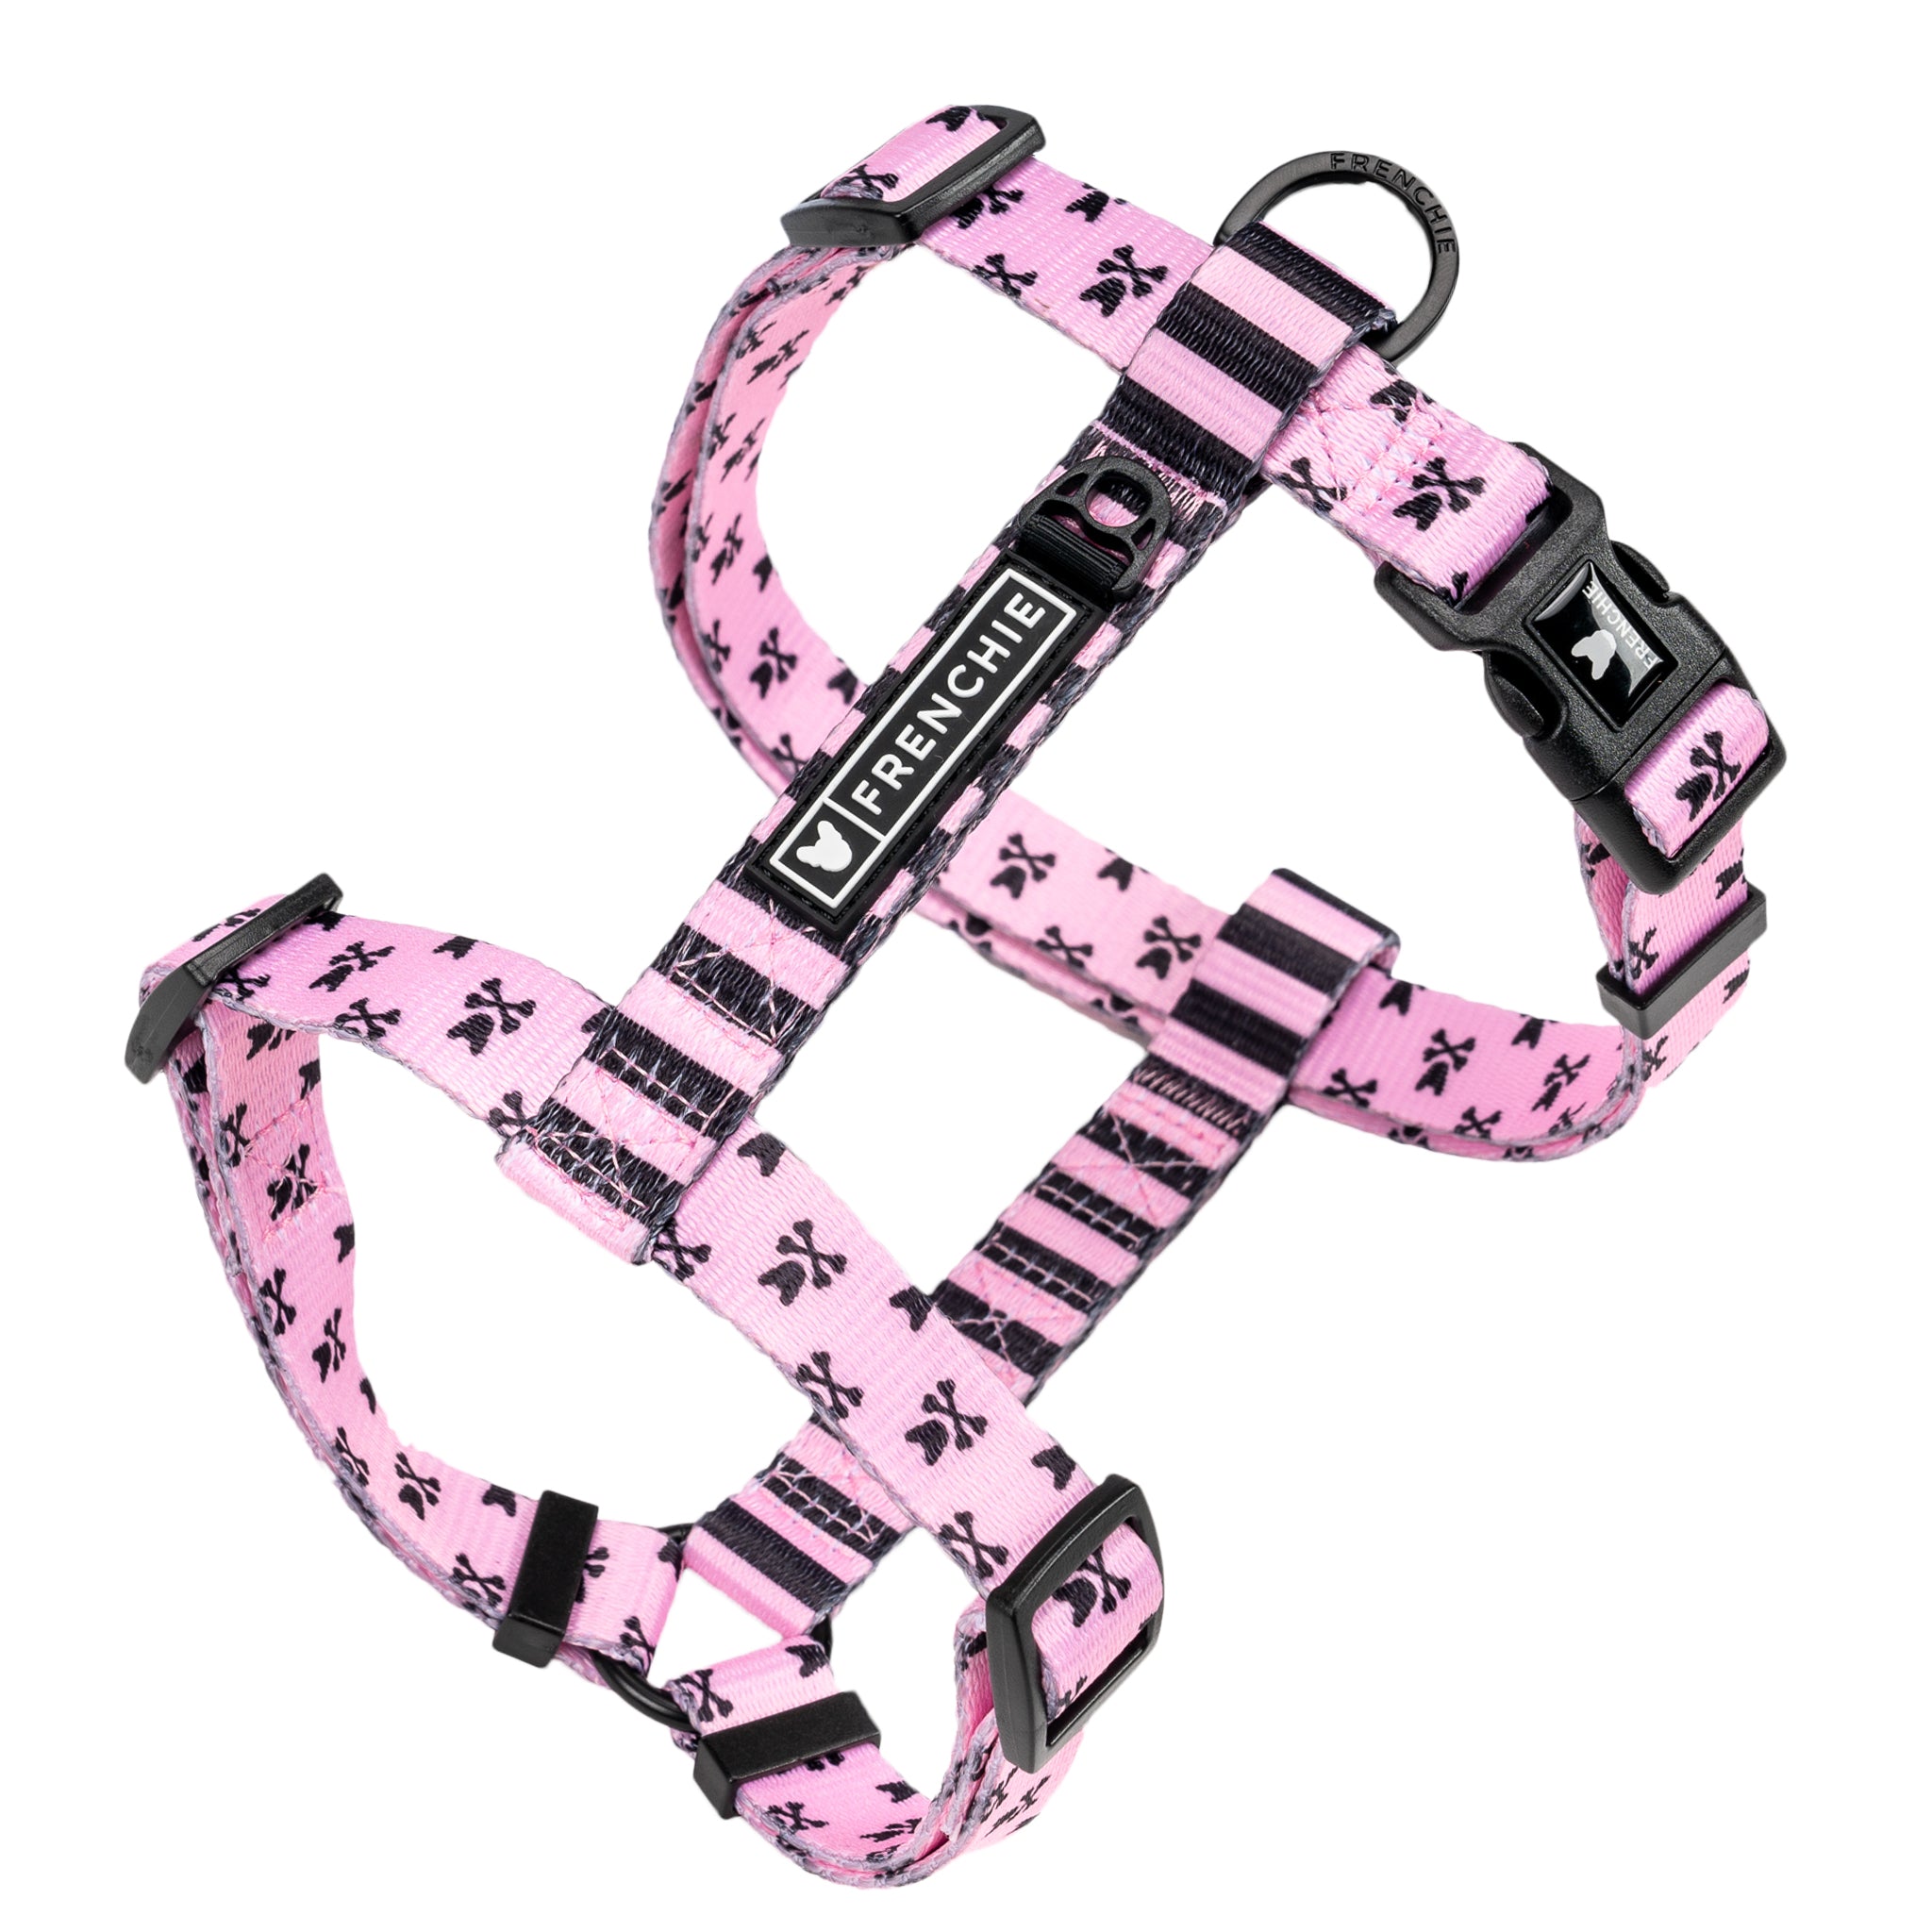 Frenchie Strap Harness - Pink Bad to the Bone MASTER - Frenchie Bulldog - Shop Harnesses for French Bulldogs - Shop French Bulldog Harness - Harnesses for Pugs